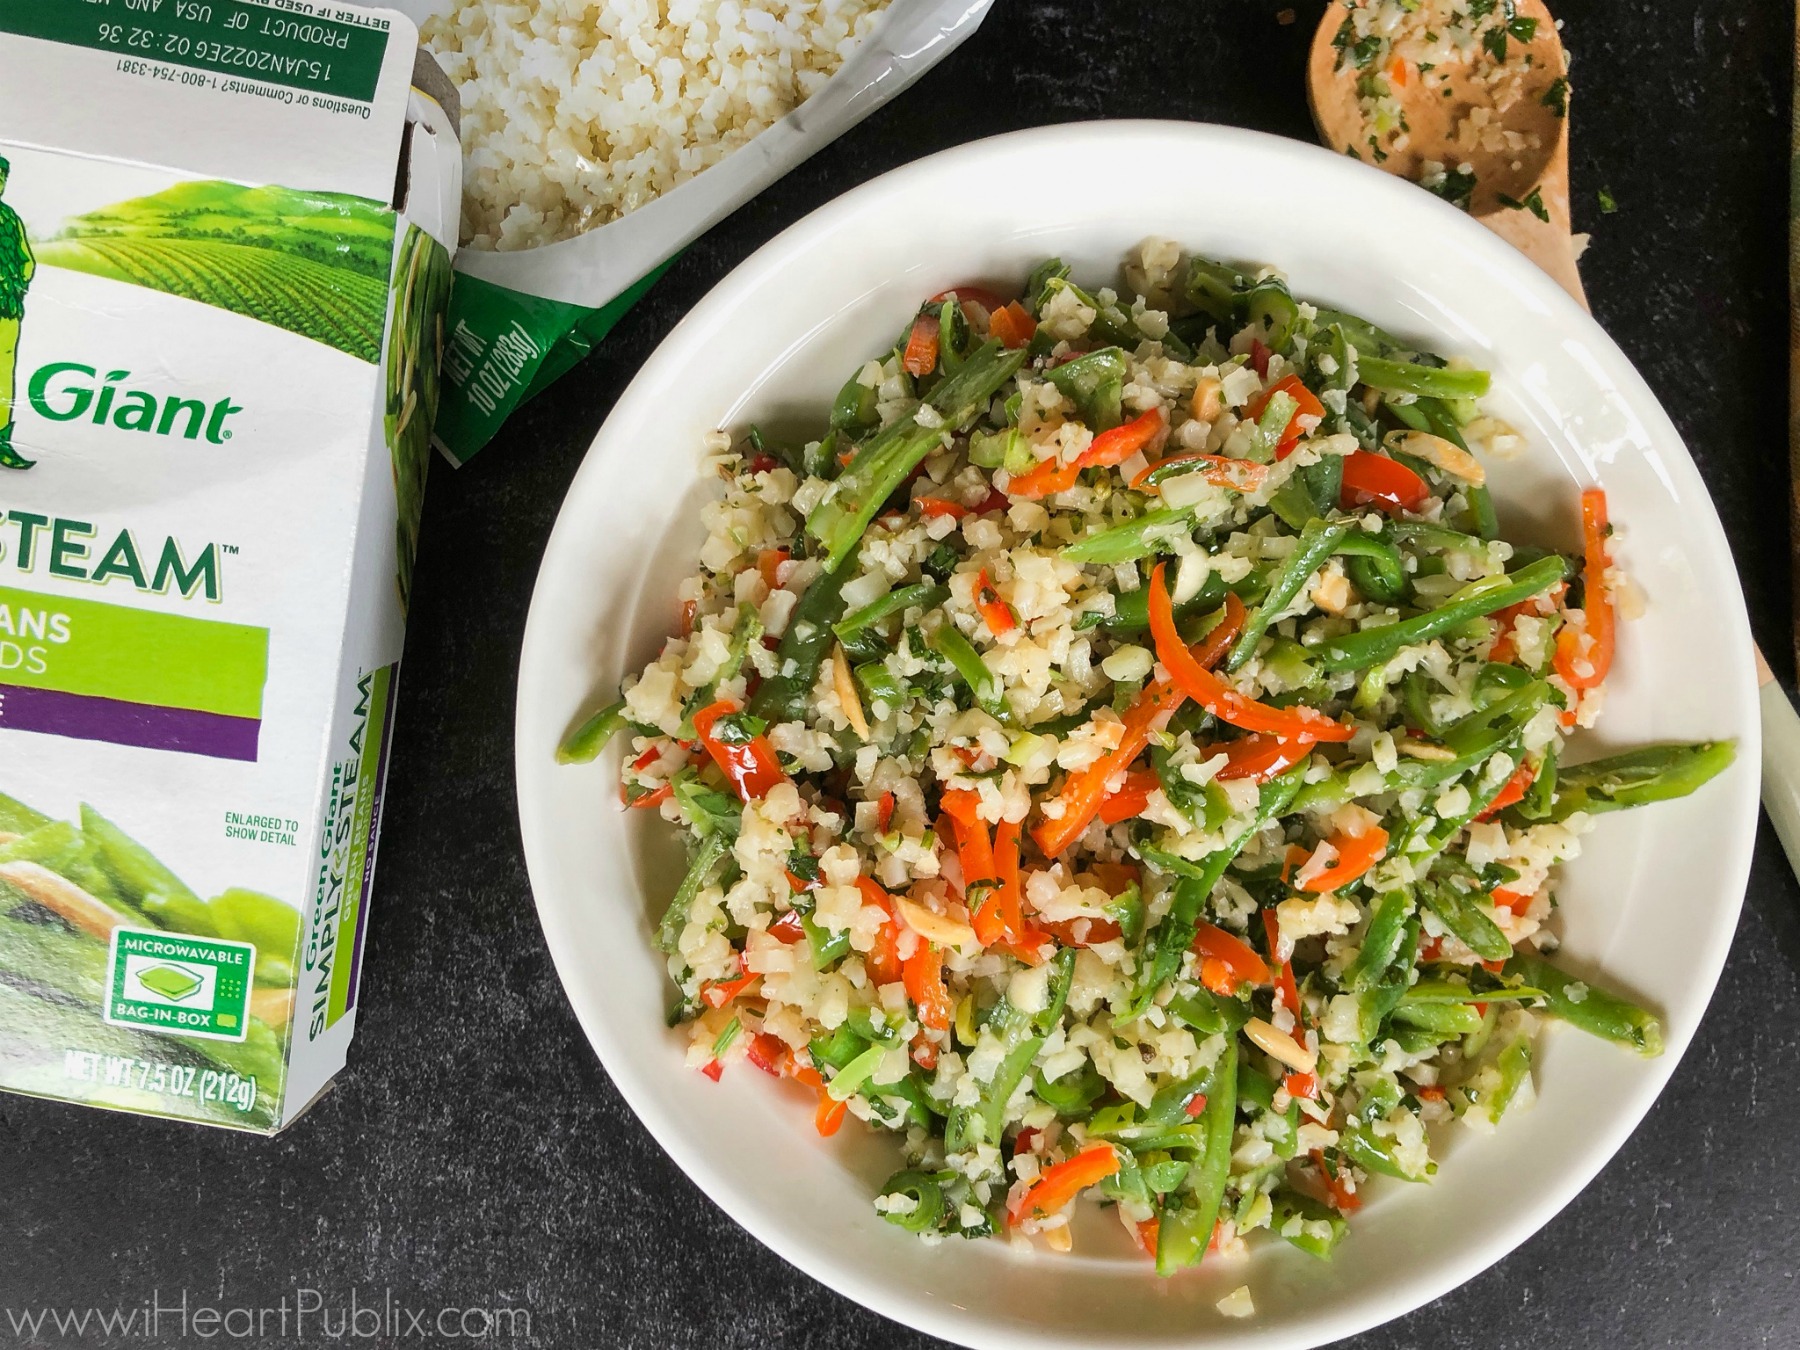 Chimichurri Cauliflower Rice Recipe - Tasty Side For The Sale On Green Giant Riced Veggies on I Heart Publix